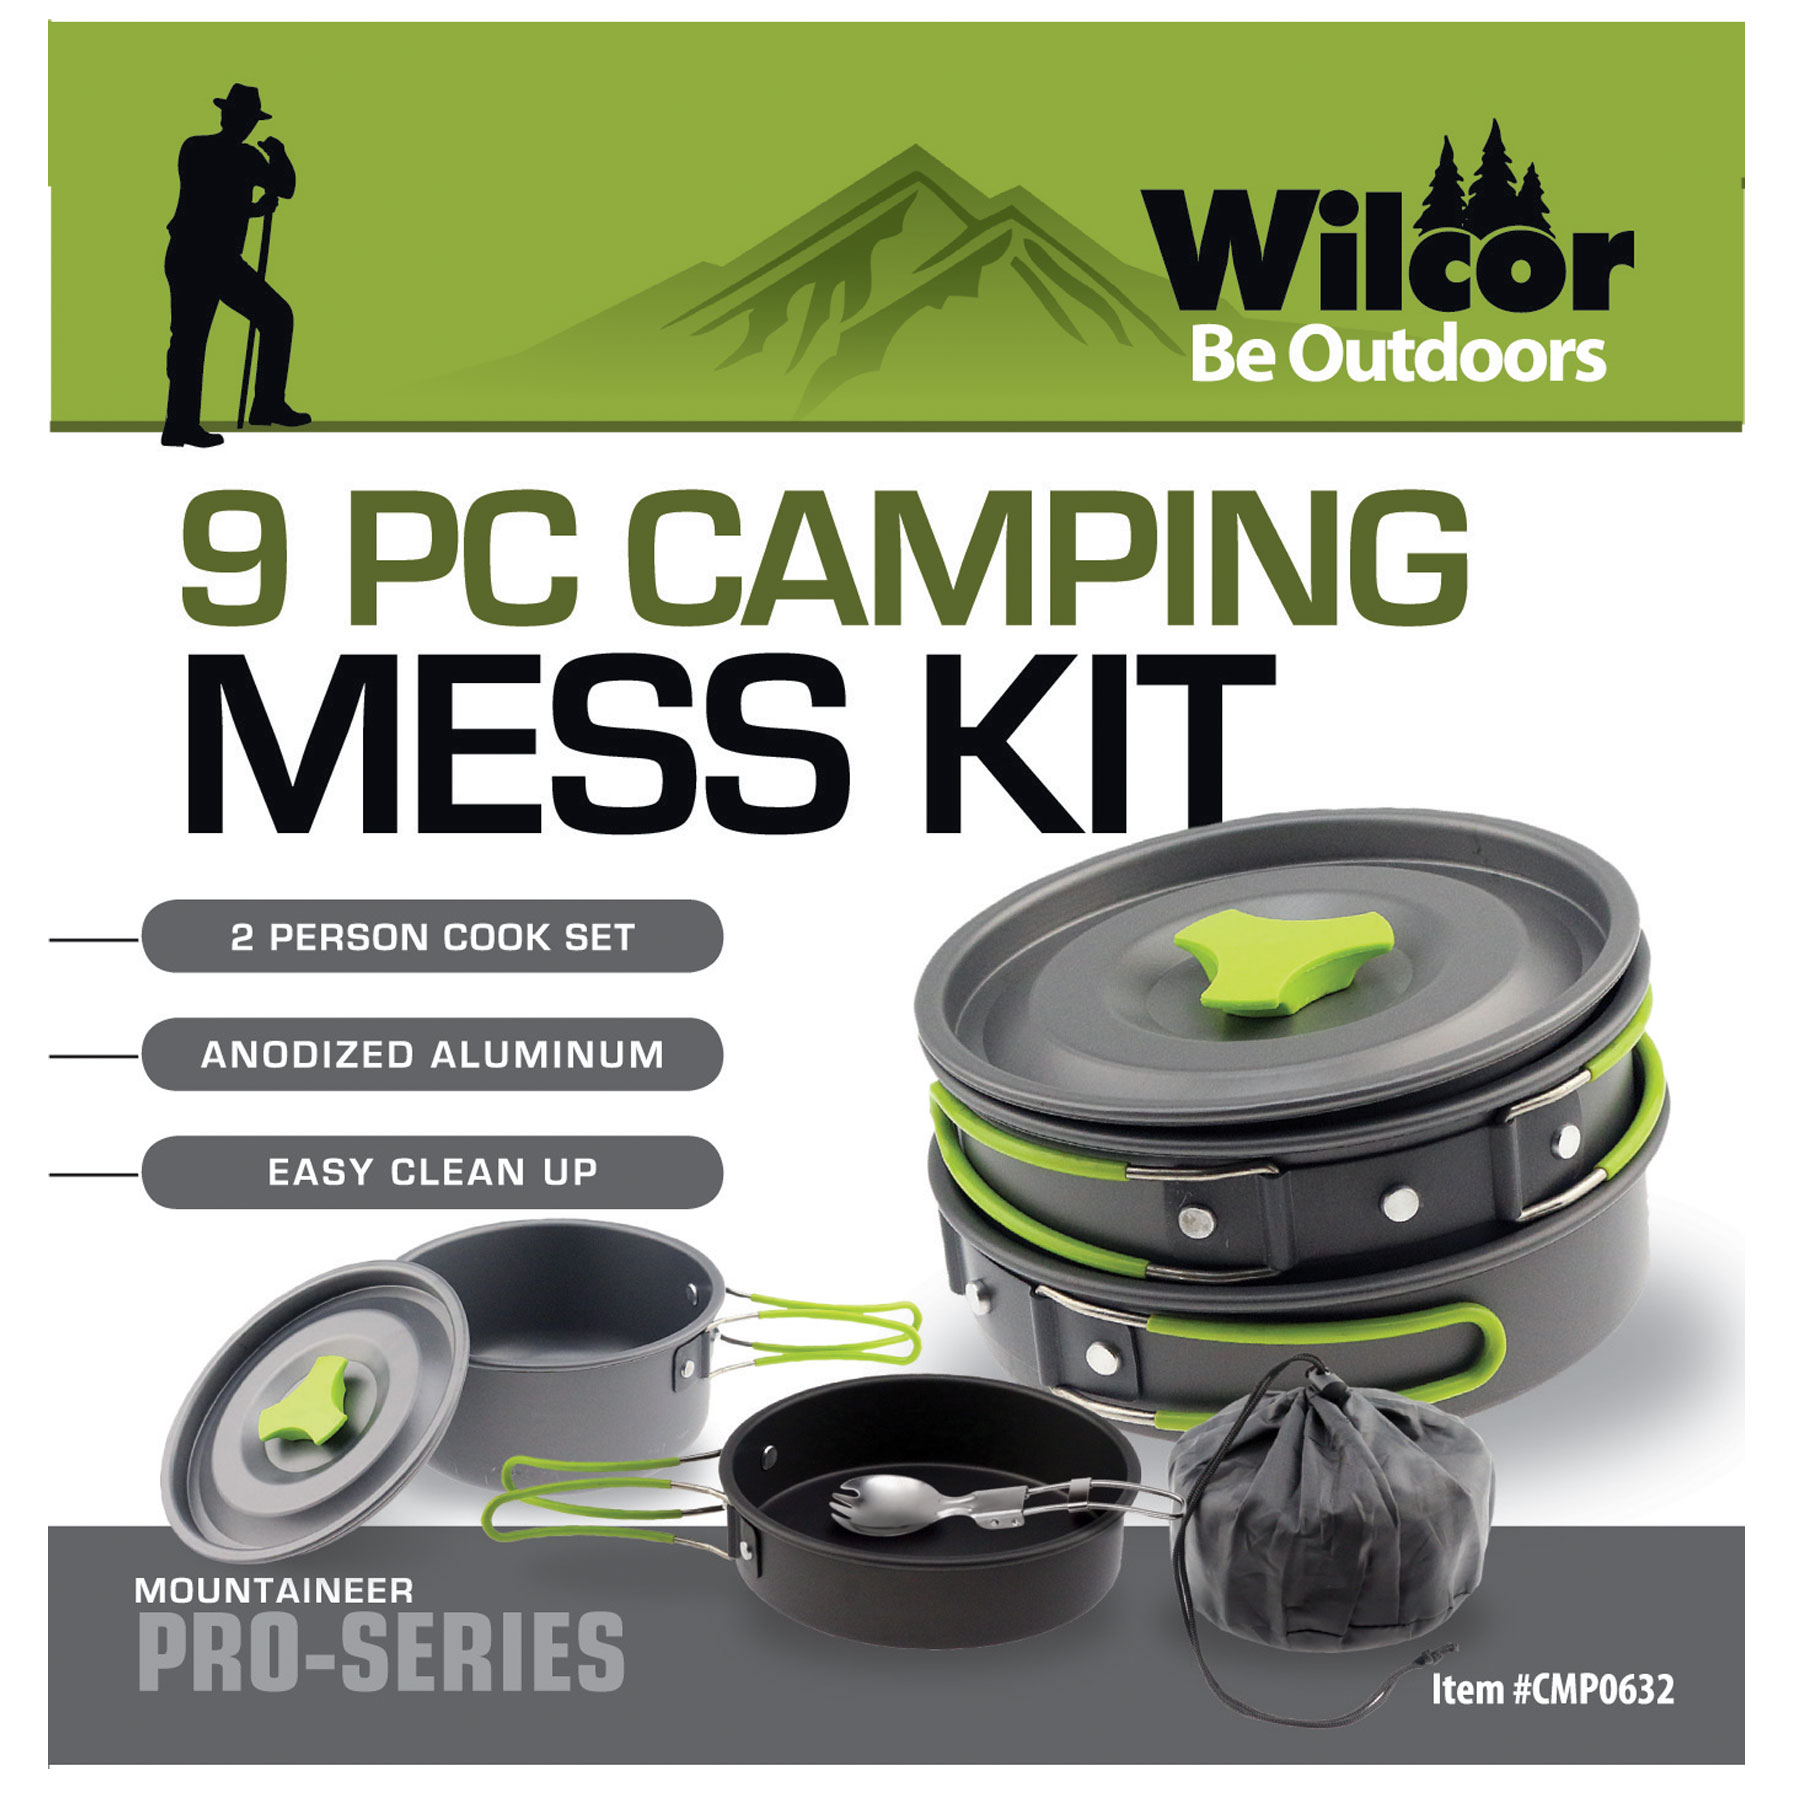 https://wilcor.net/productimages/cmp0632_camping_mess_kit_tag.jpg